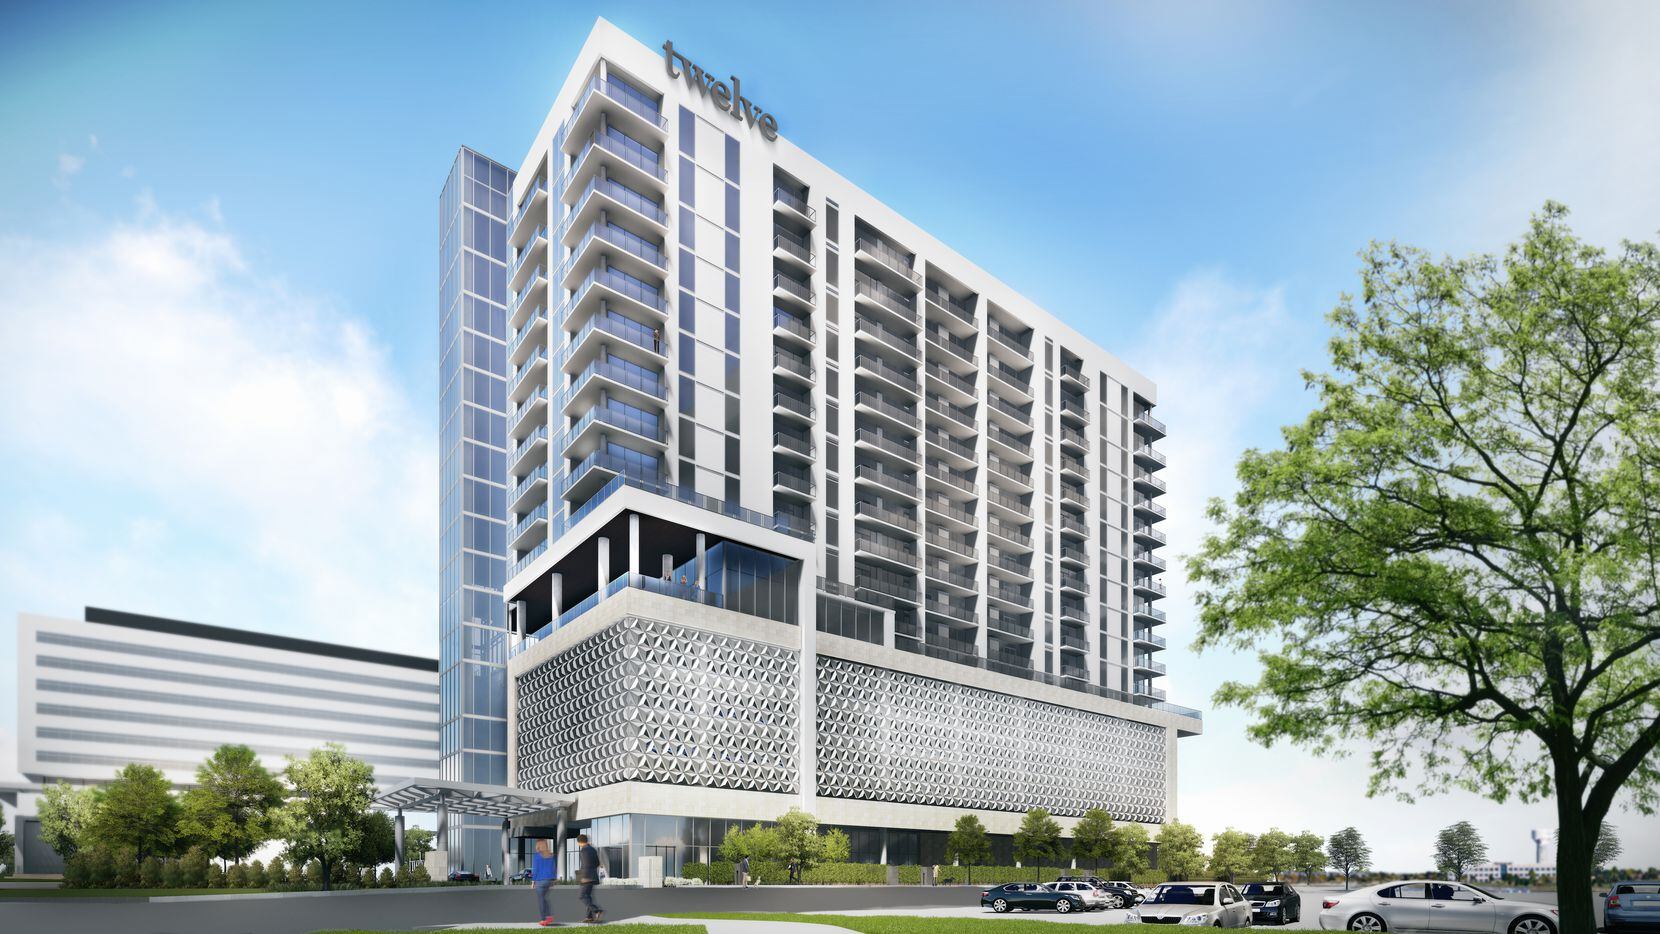 The Twelve Cowboys Way apartment tower in Frisco was designed by O'Brien Architects and...